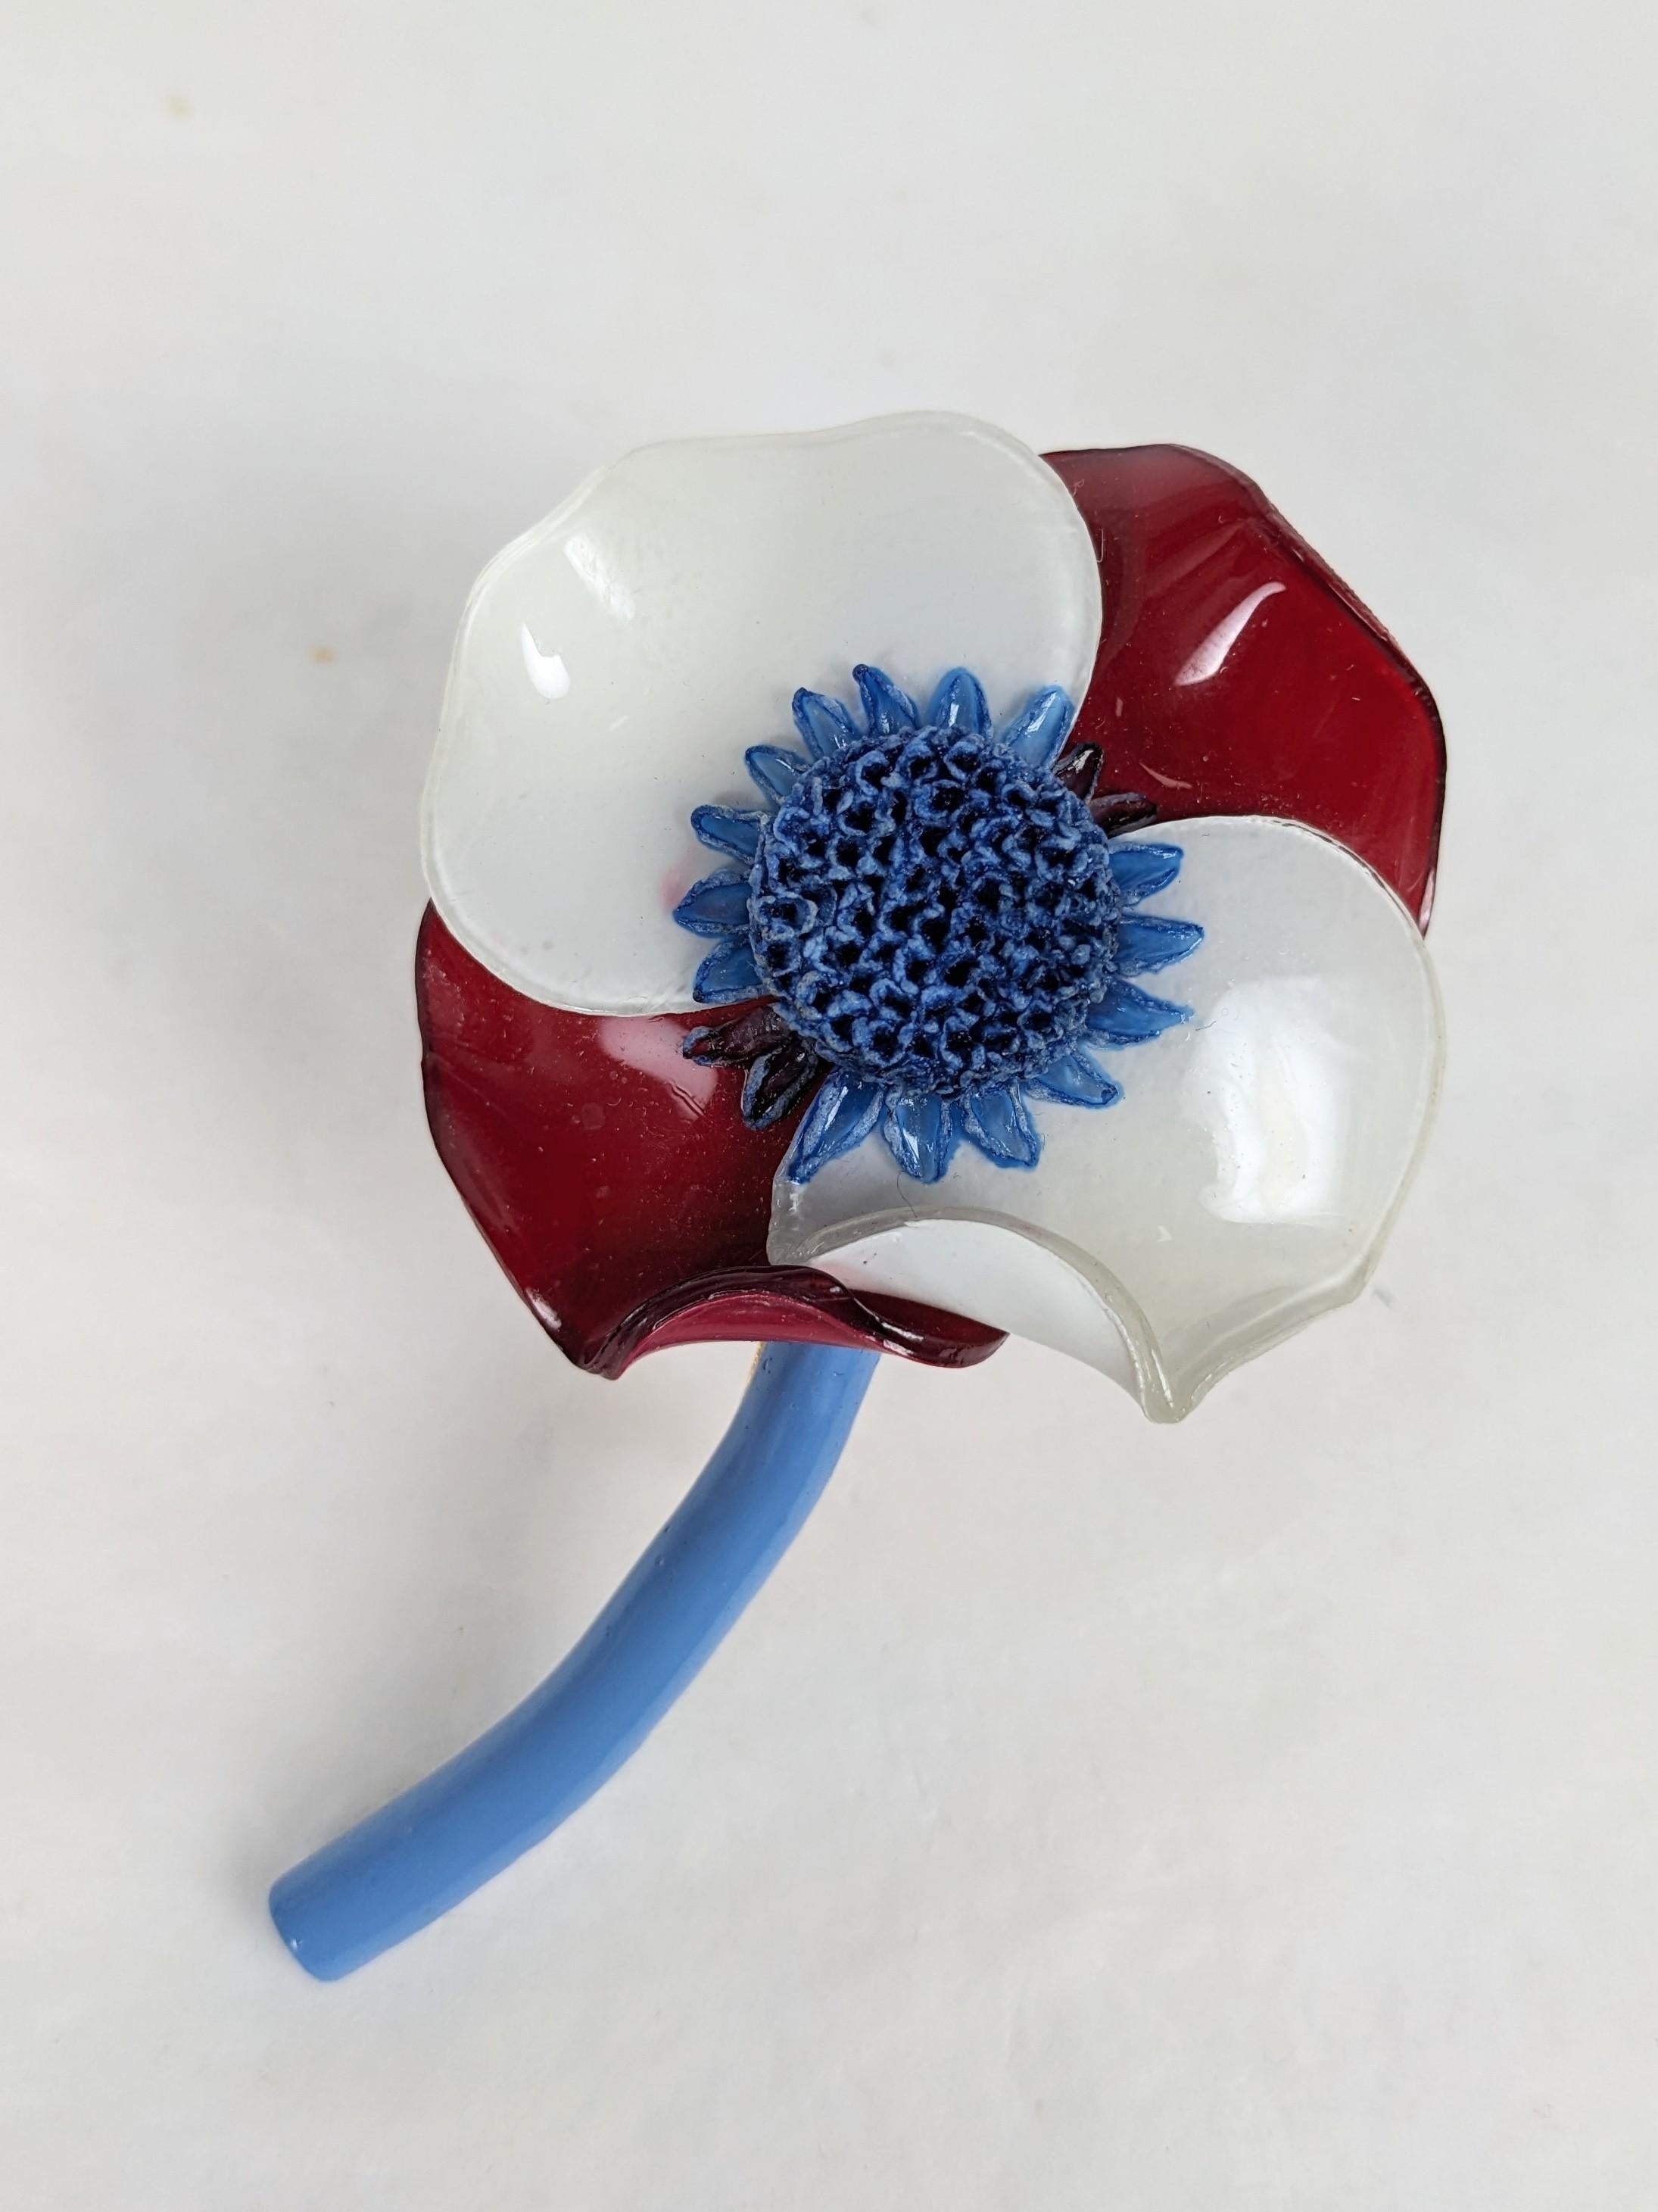 Fabrice Patriotic Flower Brooch of colored resins with hand formed petals, stamens and stem. Signed Fabrice Paris. 
1990's France. 3